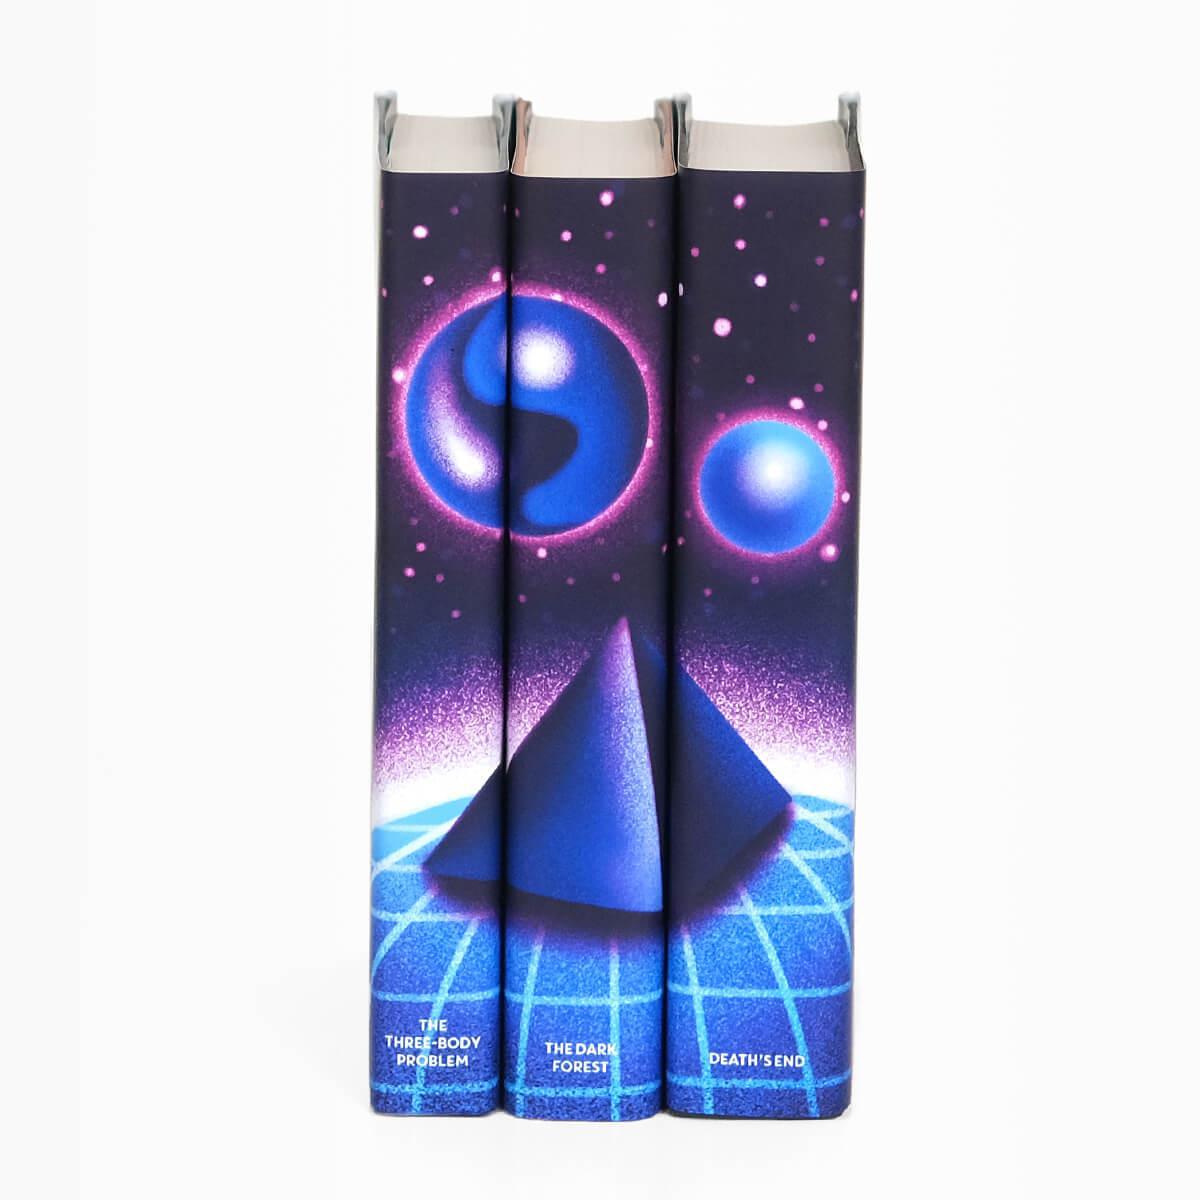 The Three-Body Problem dust jackets features blue and purple shiny orbs floating above a blue pyramid. Book title names typed across bottom of book spines in white serif type.